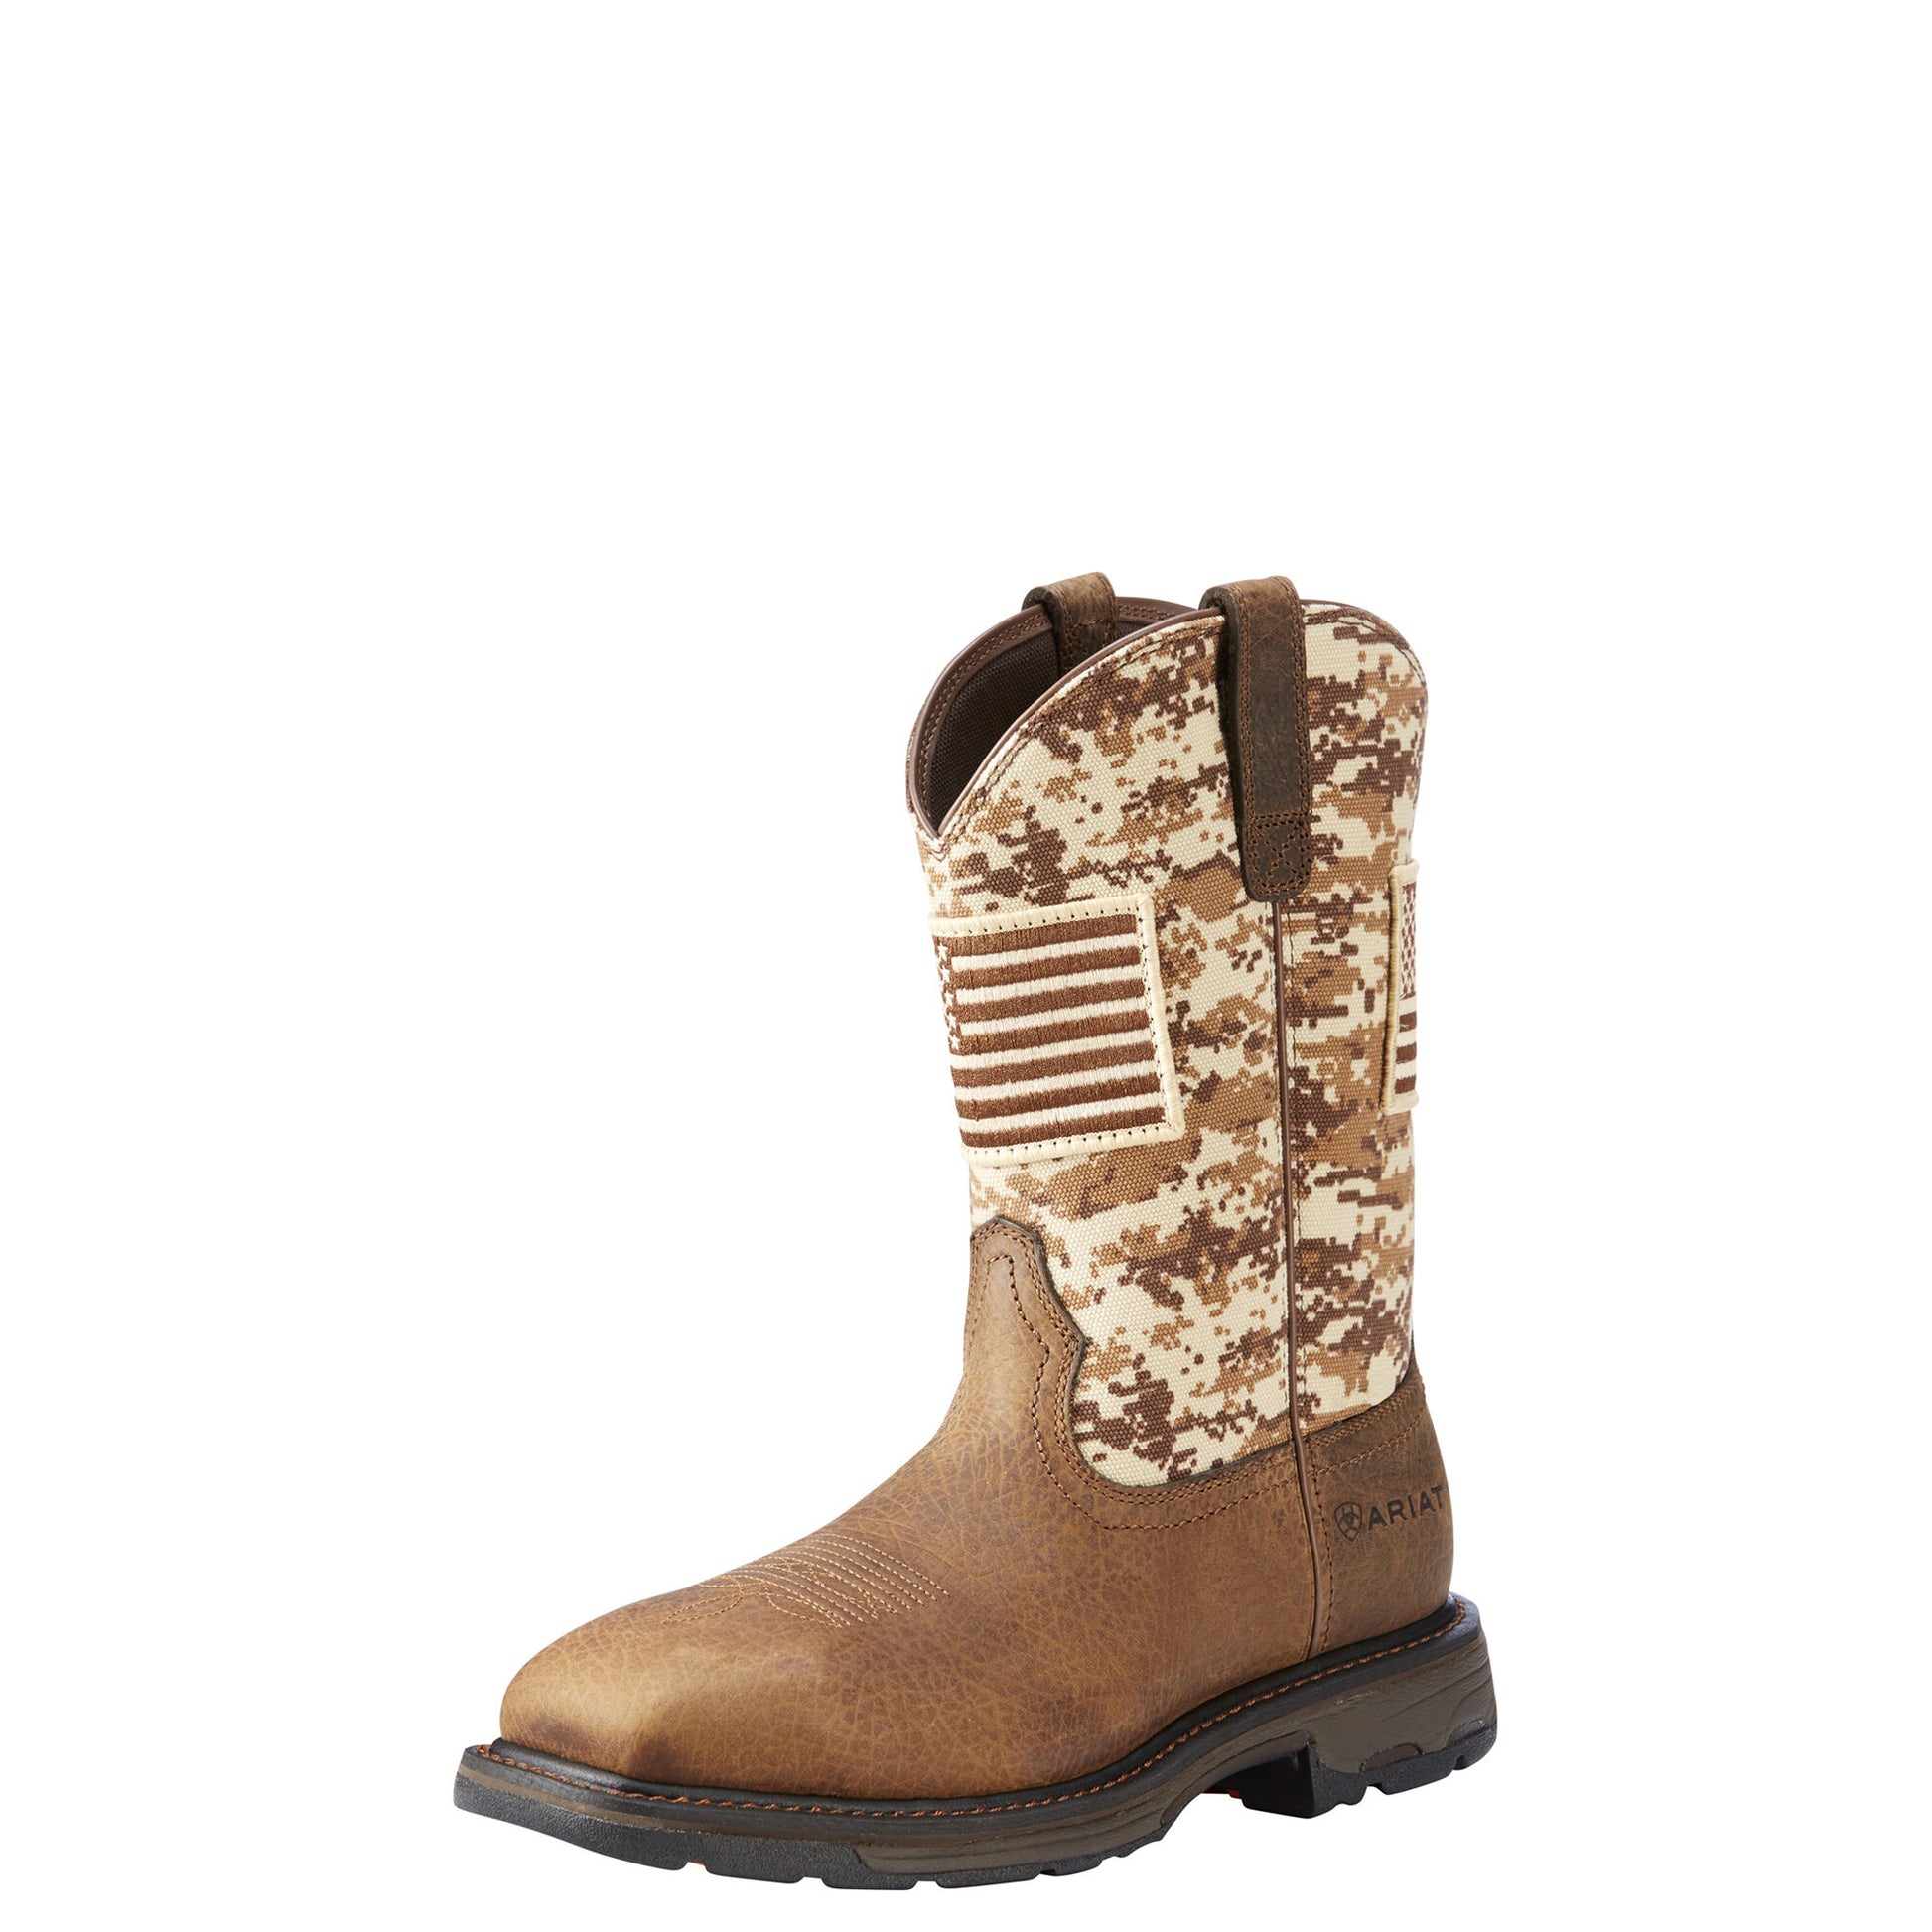 Ariat Men's WorkHog Patriot Boot - Earth/Sand Camo - French's Boots